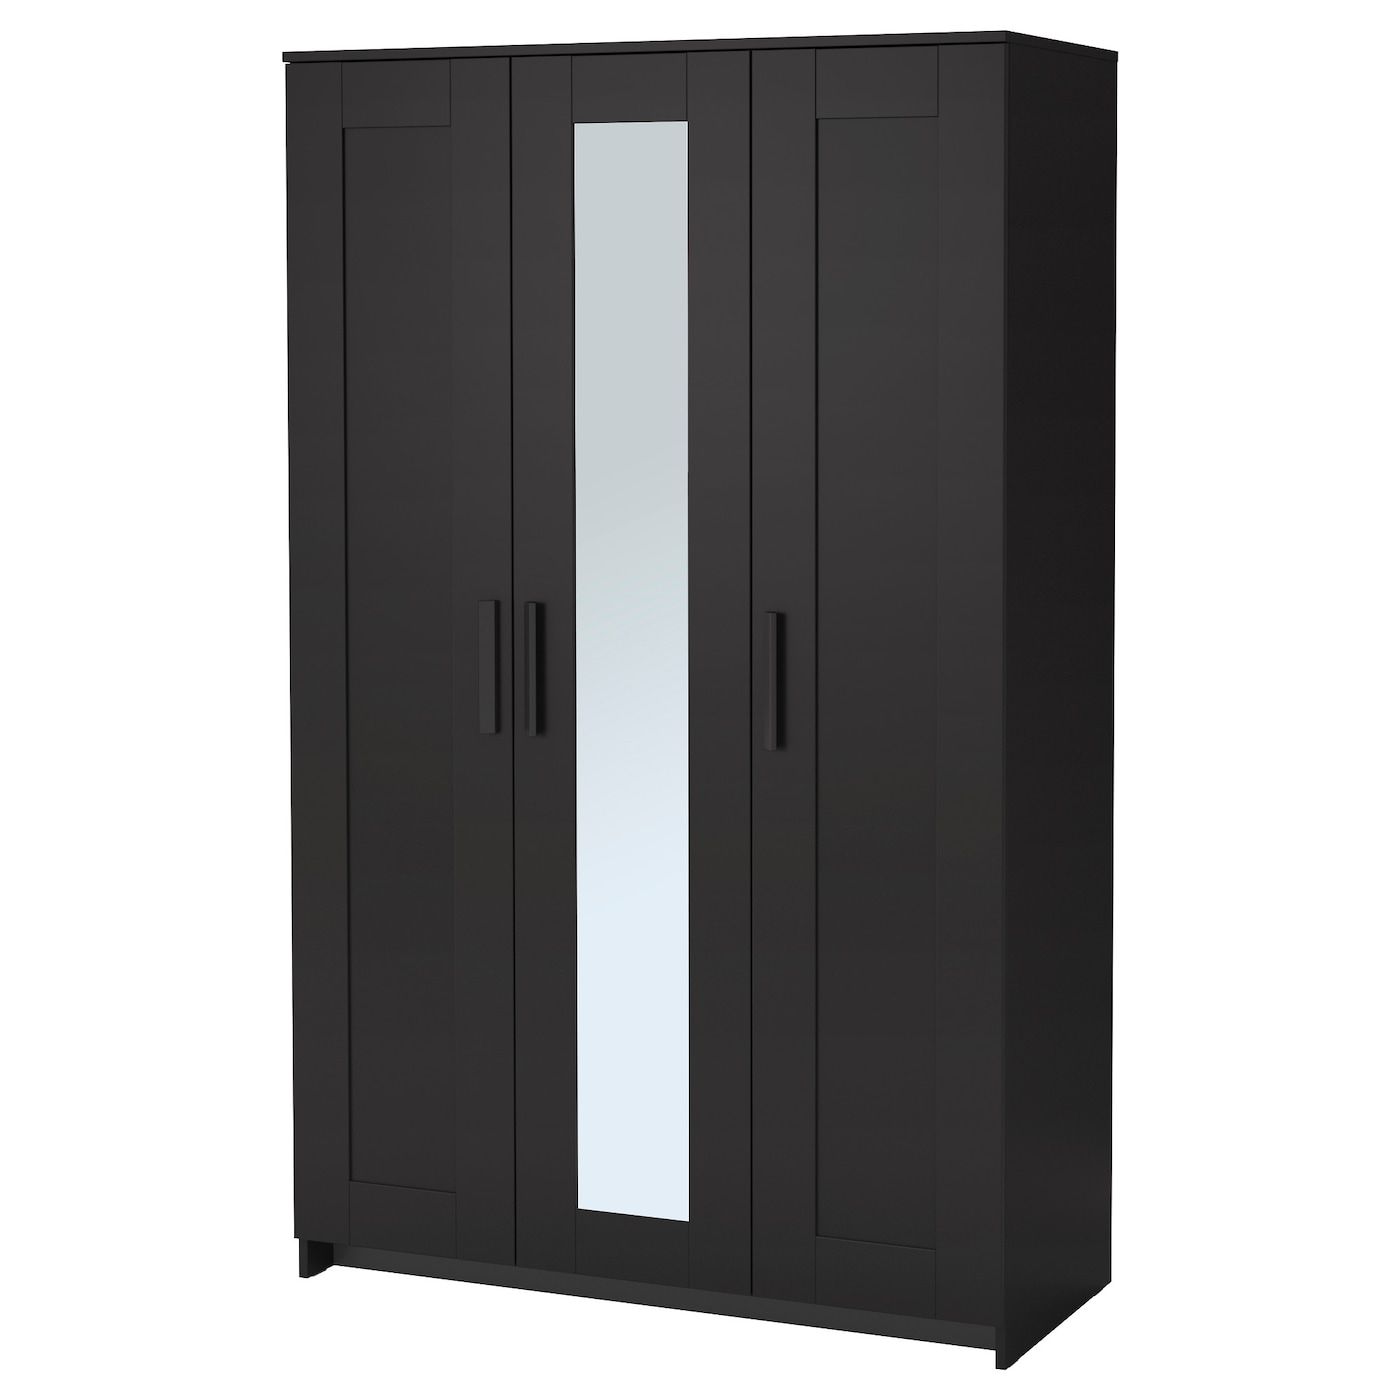 Brimnes Wardrobe With 3 Doors, Black, 46x743/4" – Ikea With Black Wardrobes With Mirror (View 3 of 15)